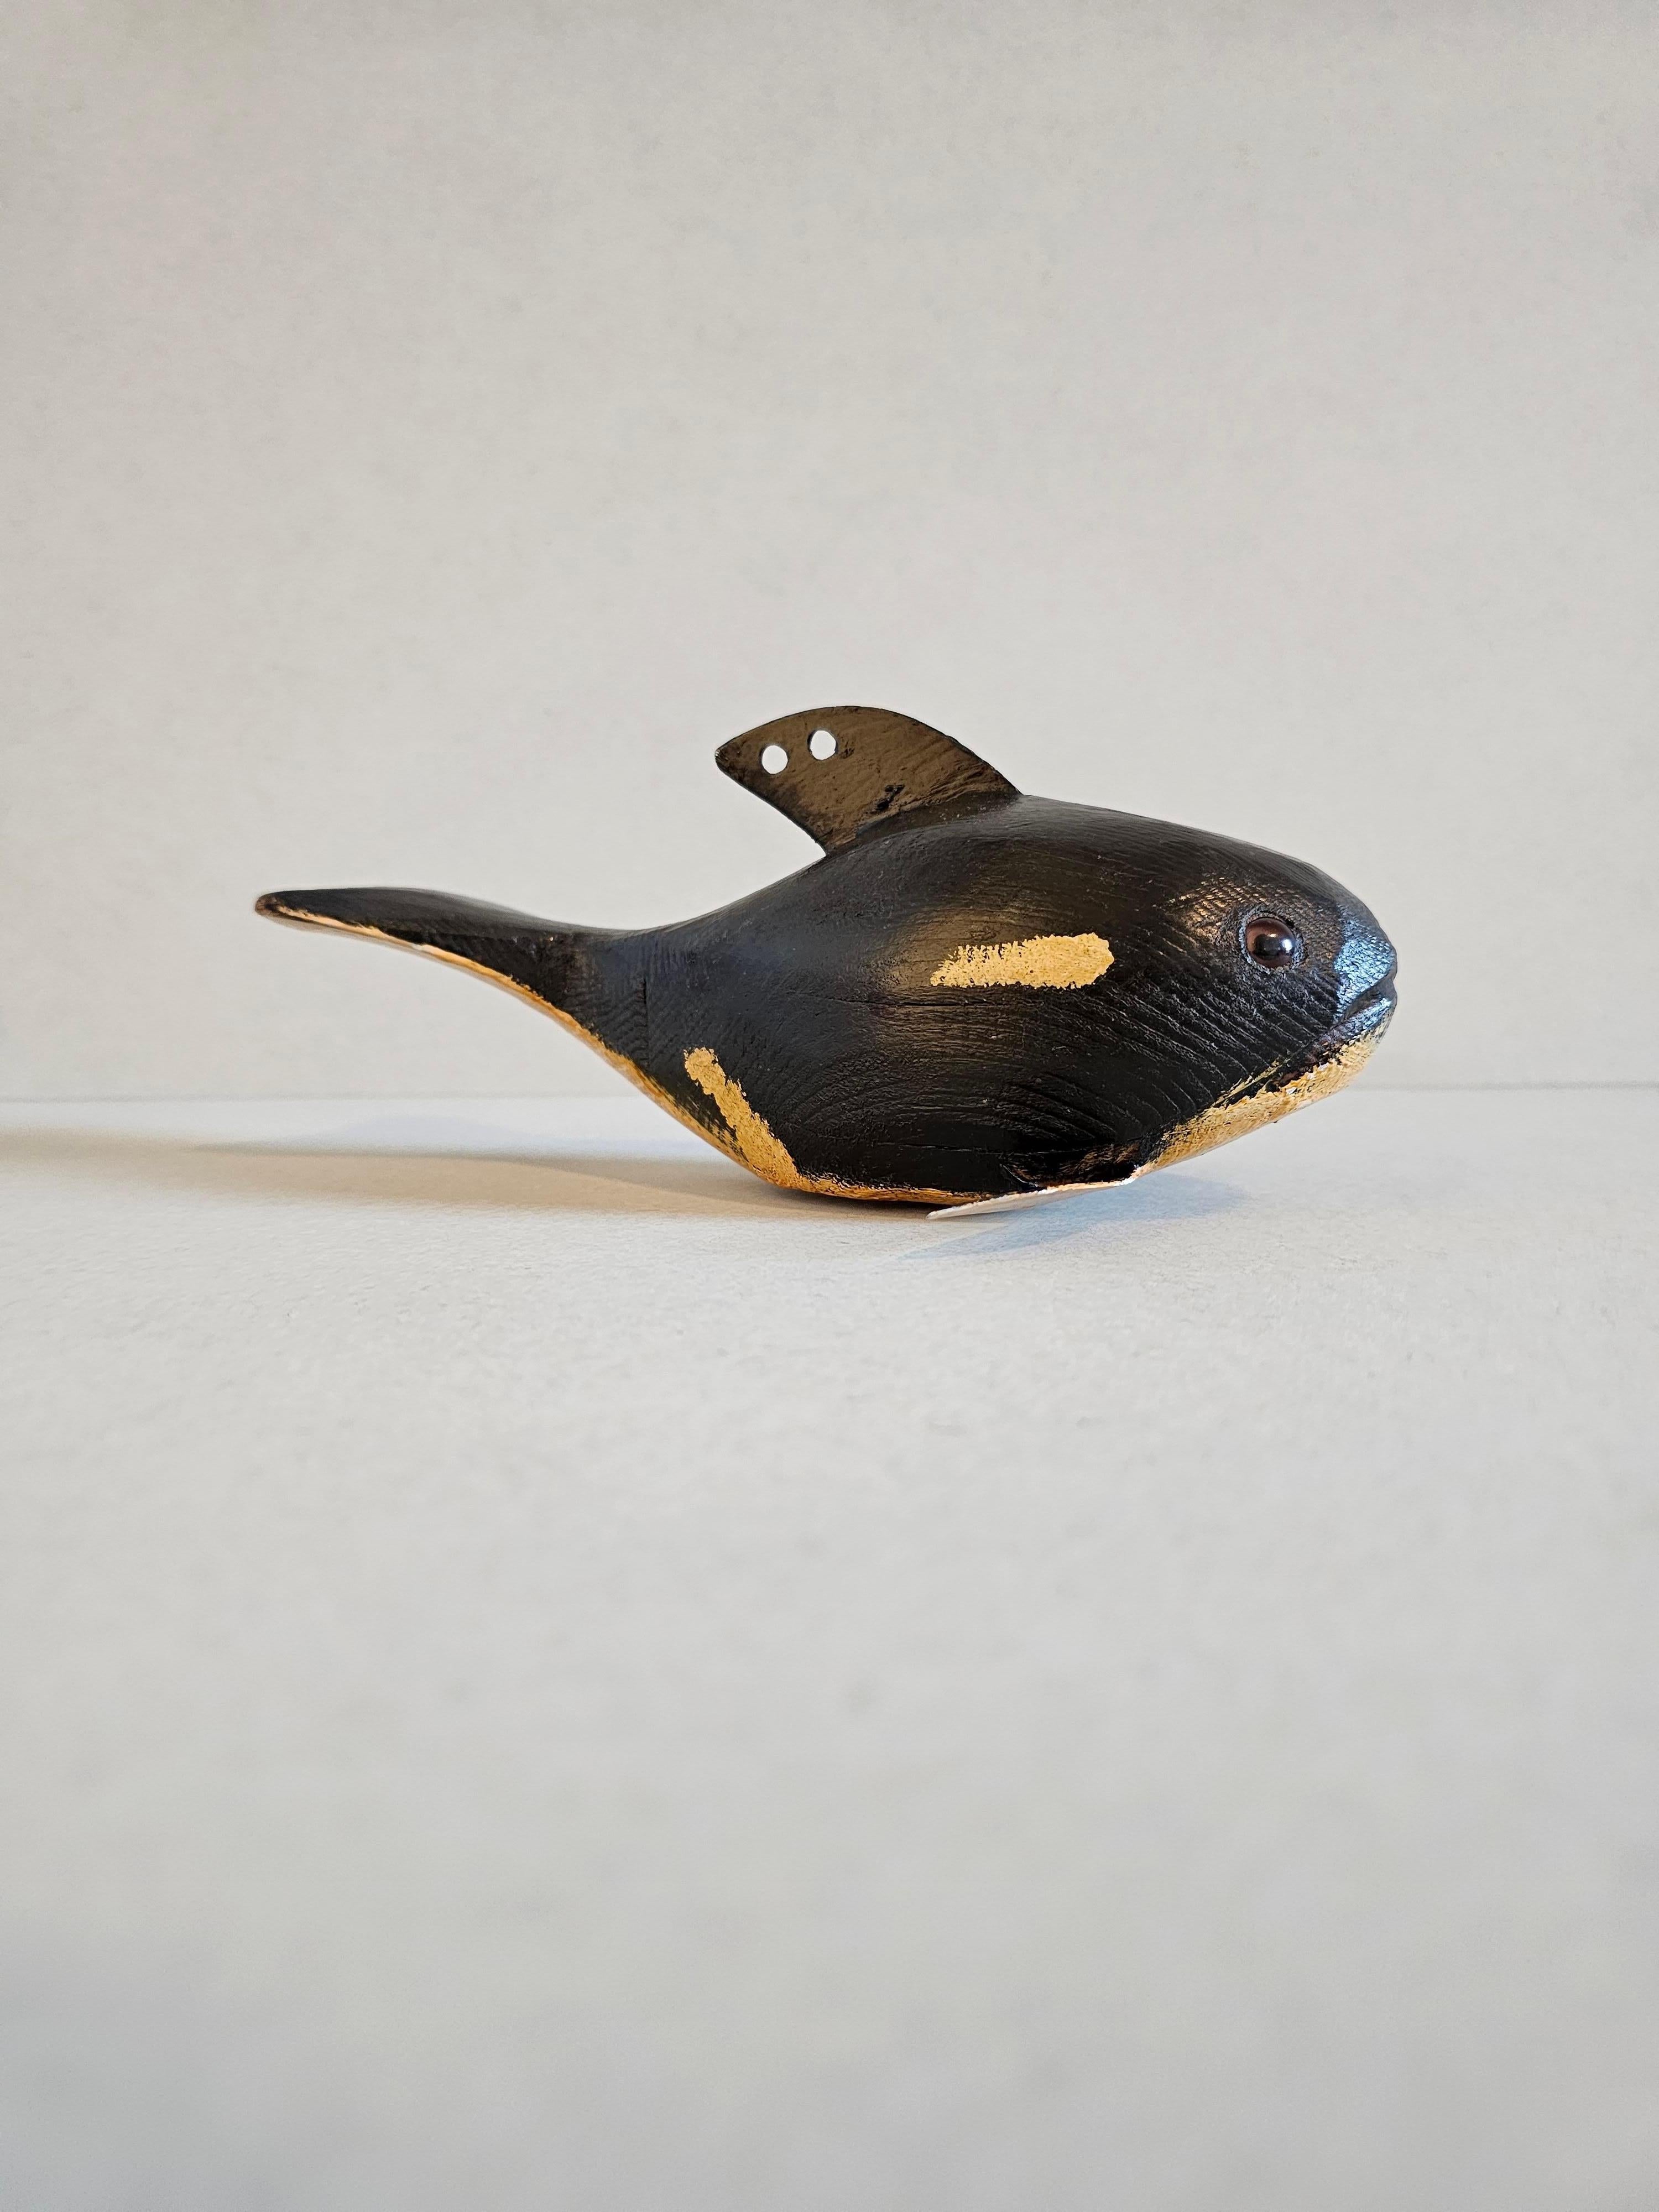 Duluth Fish Decoy American Folk Art Carved Painted Orca Killer Whale Sculpture For Sale 4